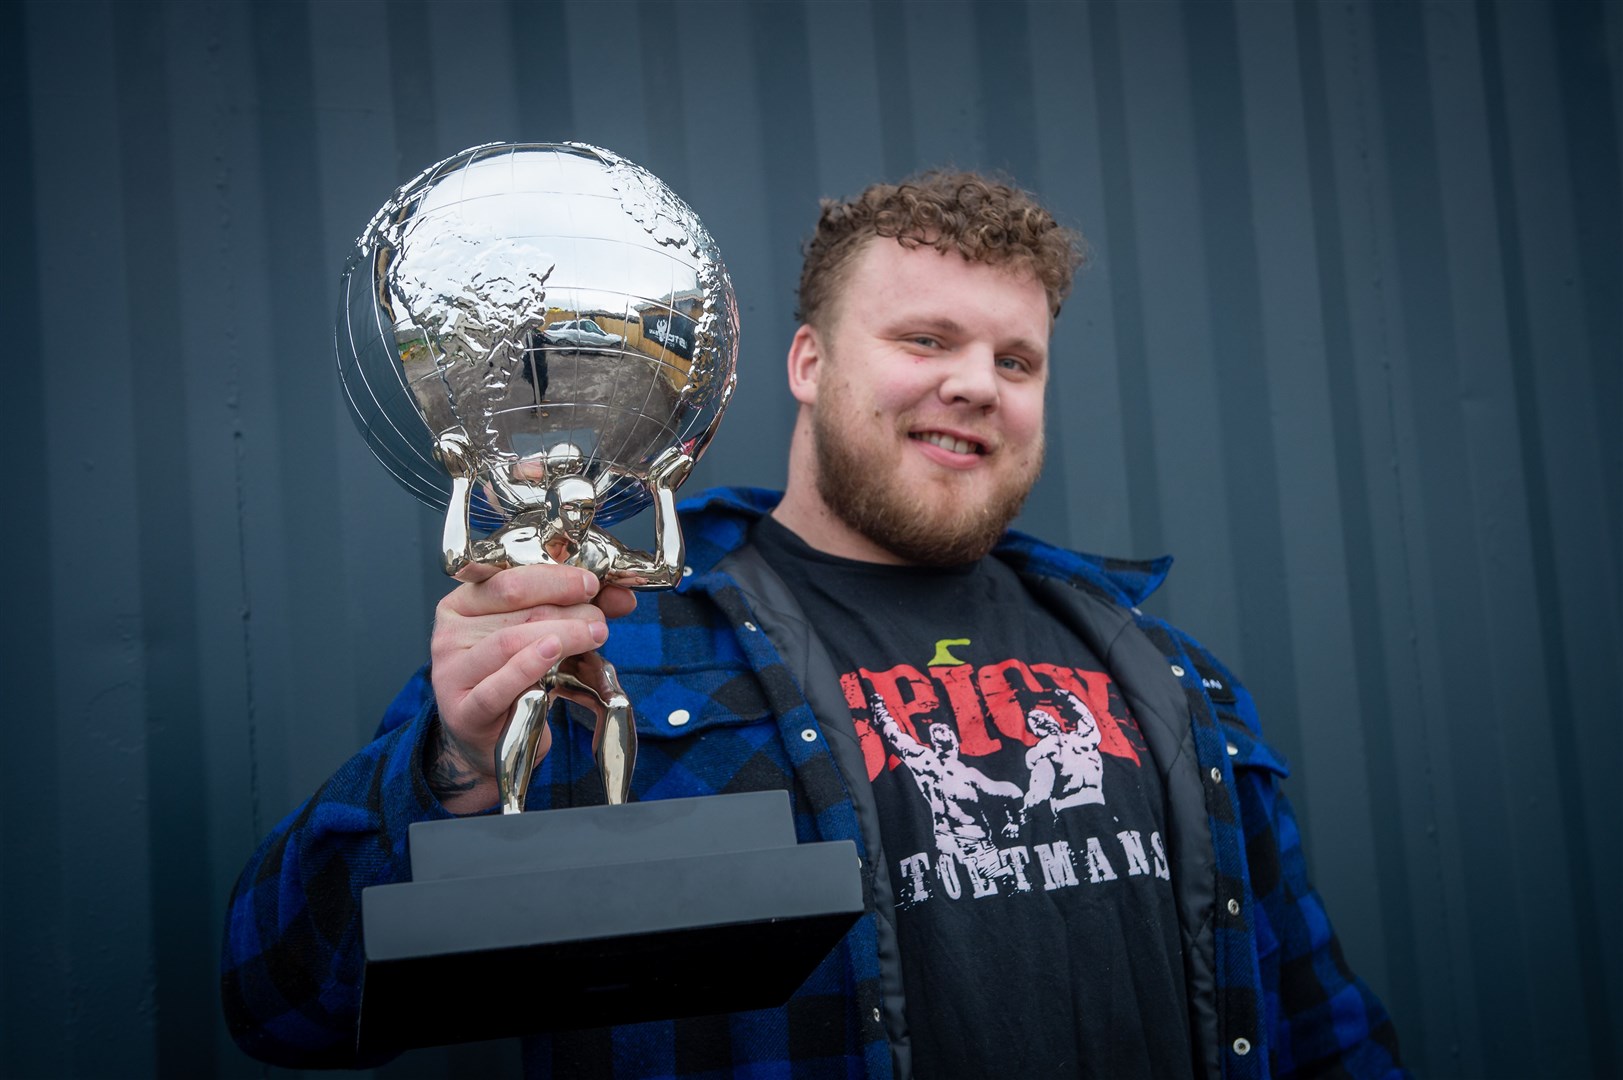 Tom Stoltman with the trophy he has now finally received from the US from his runner-up slot in World's Strongest Man comp.